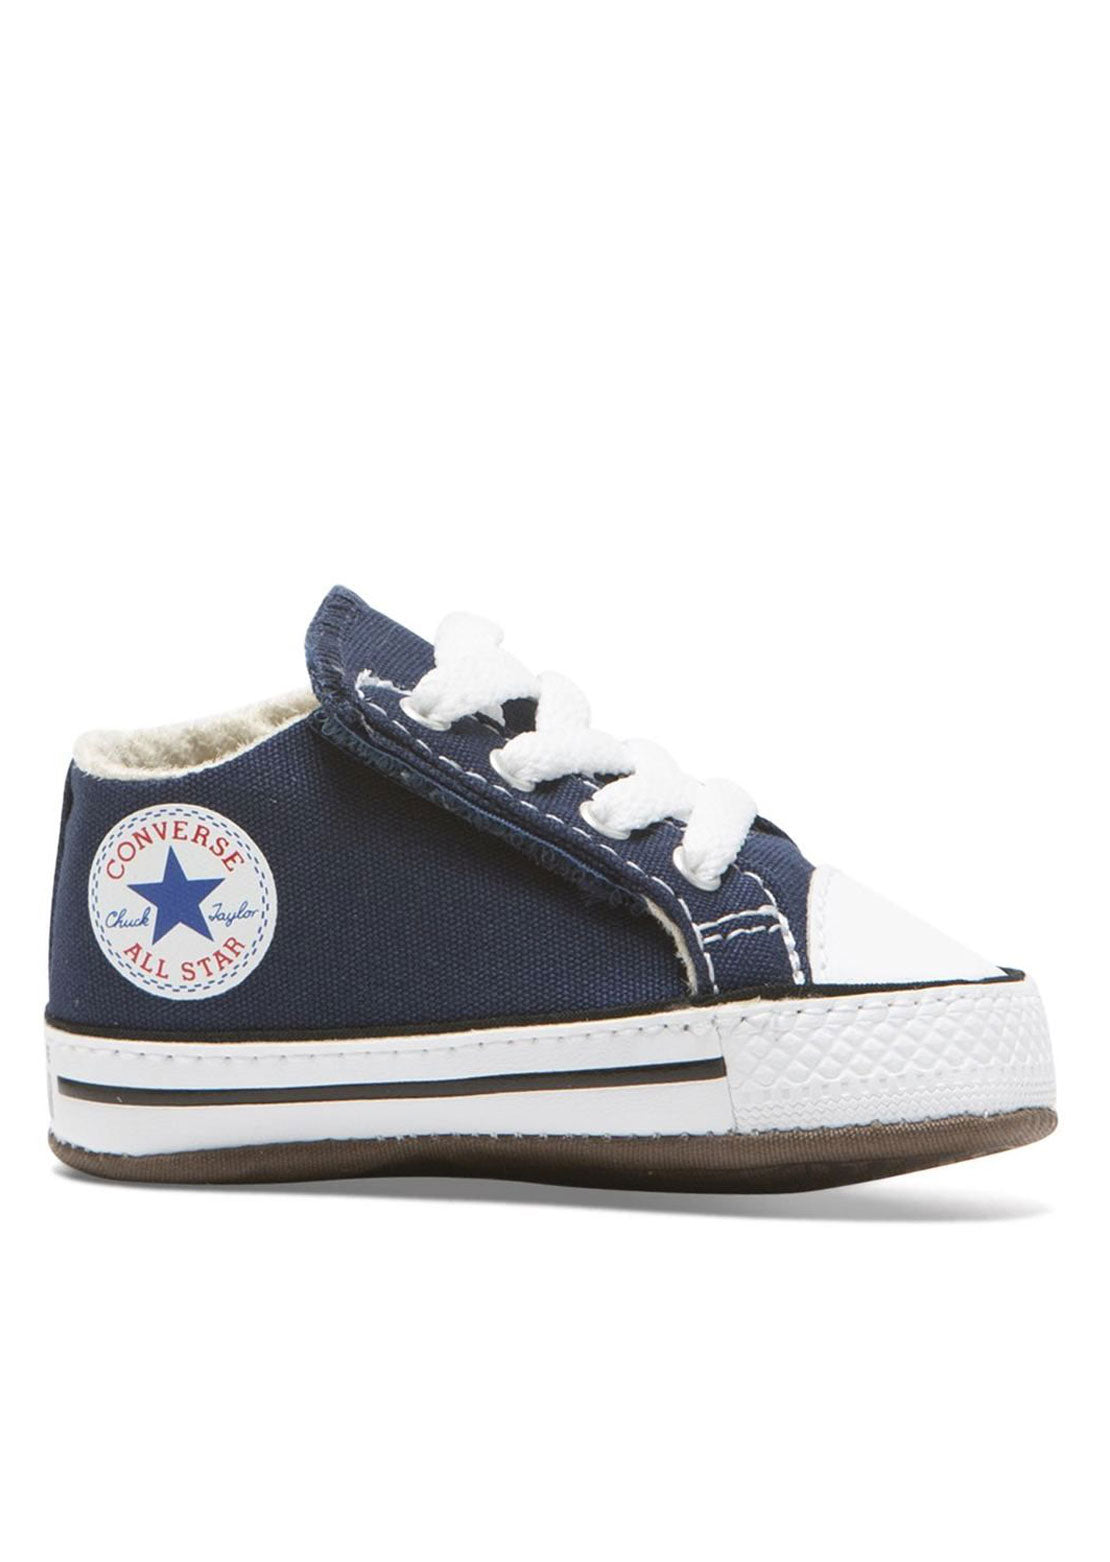 Converse Junior Infant Chuck Taylor All Star Cribster Canvas Shoes Navy/Natural Ivory/White